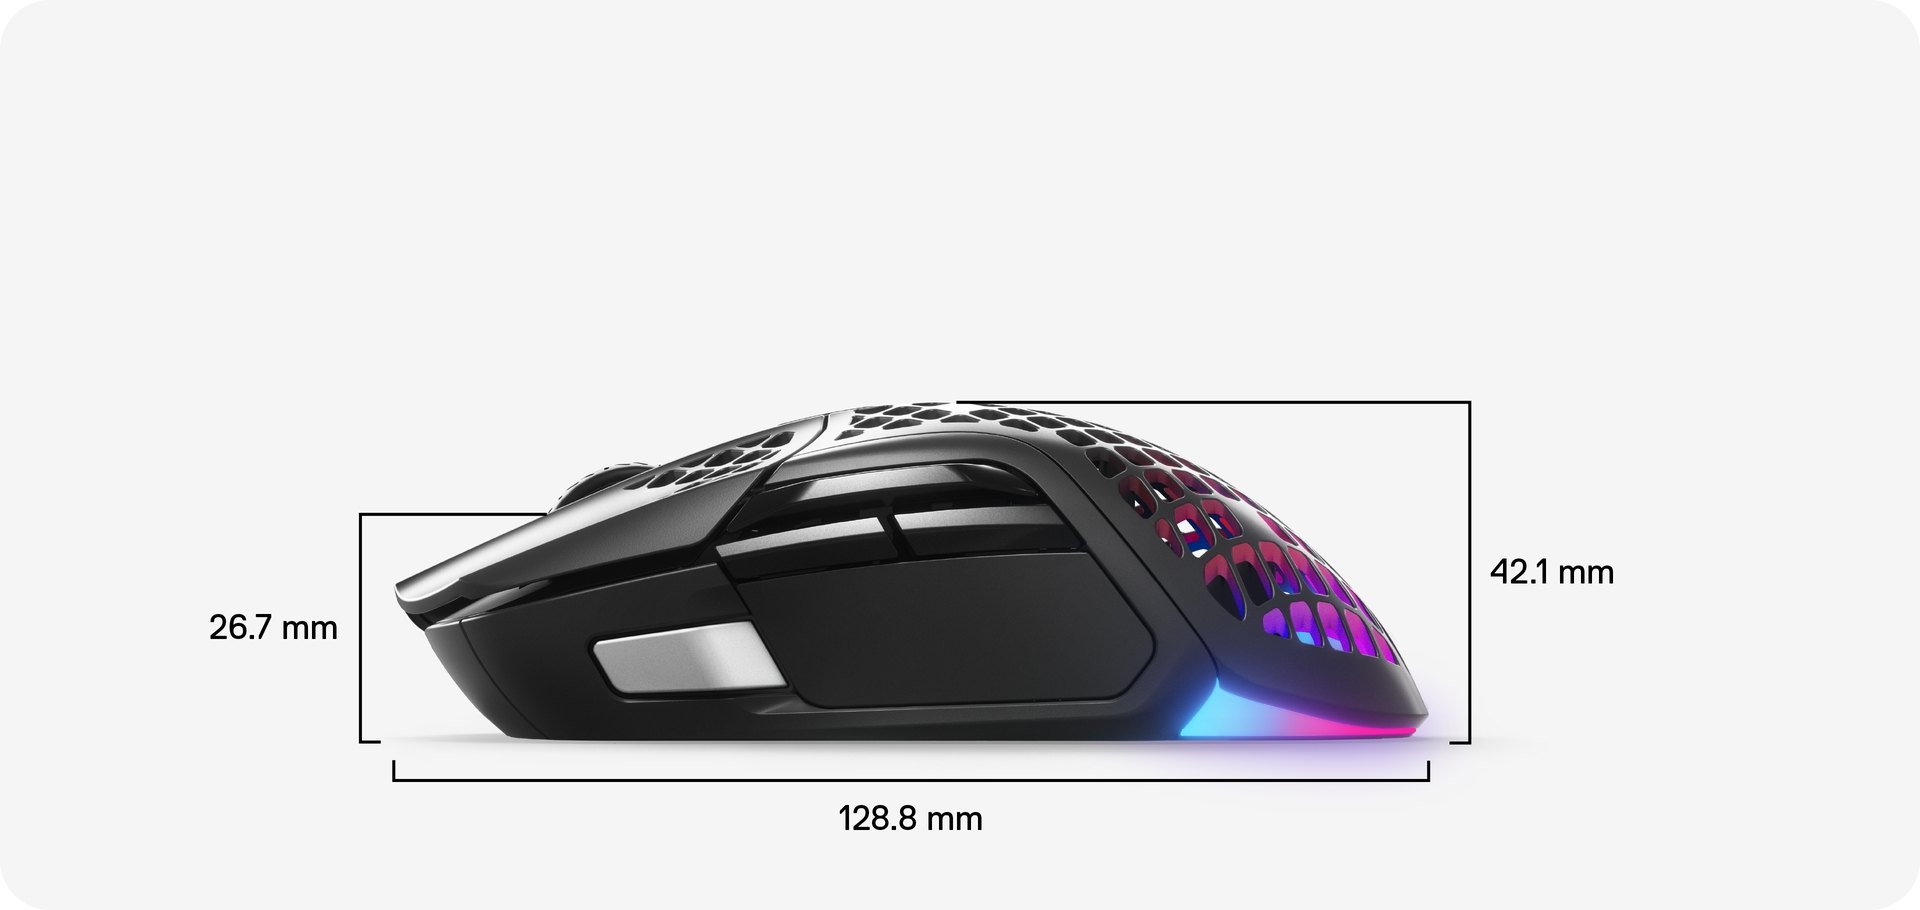 Side view with dimensions for the Aerox 5 Wireless mouse: 42.1 MM from palm rest to base, 26.7 MM from scroll wheel to base, and 128.8 MM in total length.